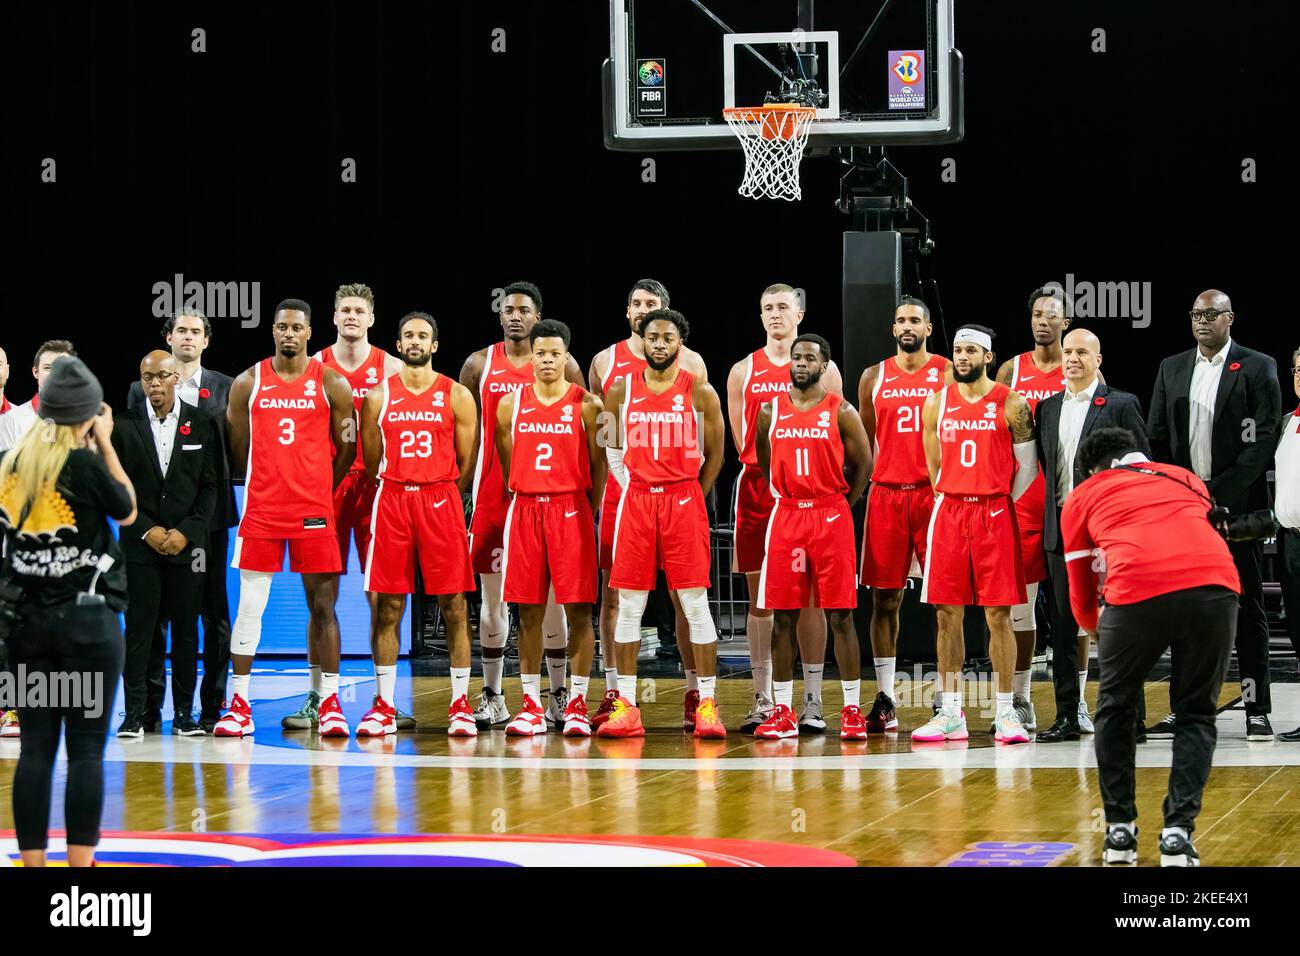 Edmonton, Canada. 10th Nov, 2022. The Canada team, (L to R, Front to Back)- Nate Mitchel (Coach)l, Melvin Ejim, Phil Scrubb, Trae Bell-Haynes, Aaron Best, Kenny Chery, Kassius Robertson, Nate Bjorkgren (Coach), Michael Meeks (Canada Basketball), Conor Morgan, Kalif Young, Owen Klassen, Thomas Kennedy, Thomas Scrubb, Jean-Victor Makuma.Canada defeats Venezuela 94-56 to qualify for the FIBA World Cup 2023. Canada Goose is now 9-0 in qualifying. Credit: SOPA Images Limited/Alamy Live News Stock Photo